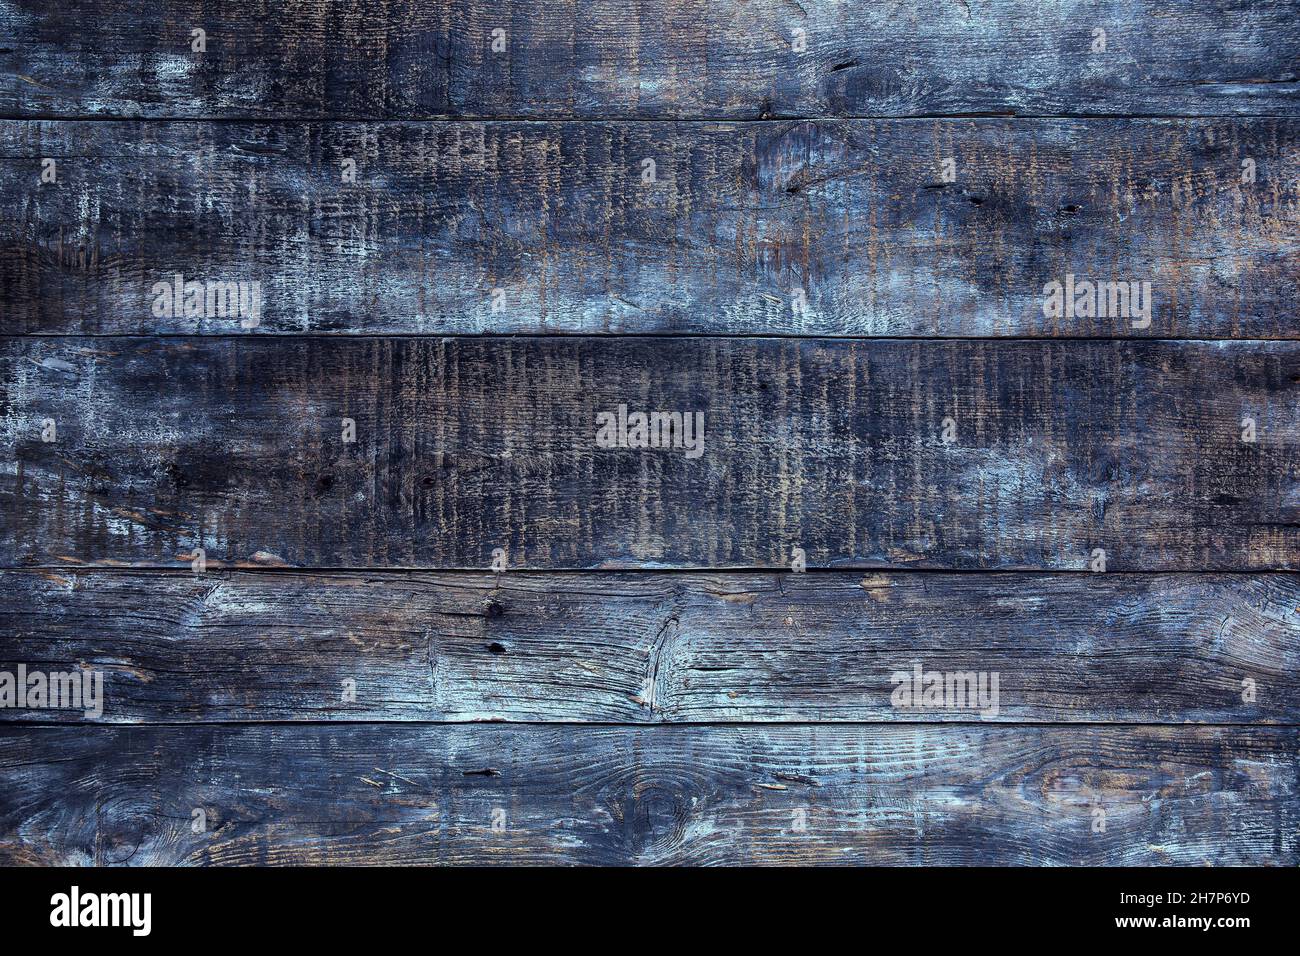 Wooden background. Wood texture. Dark rustic surface Stock Photo